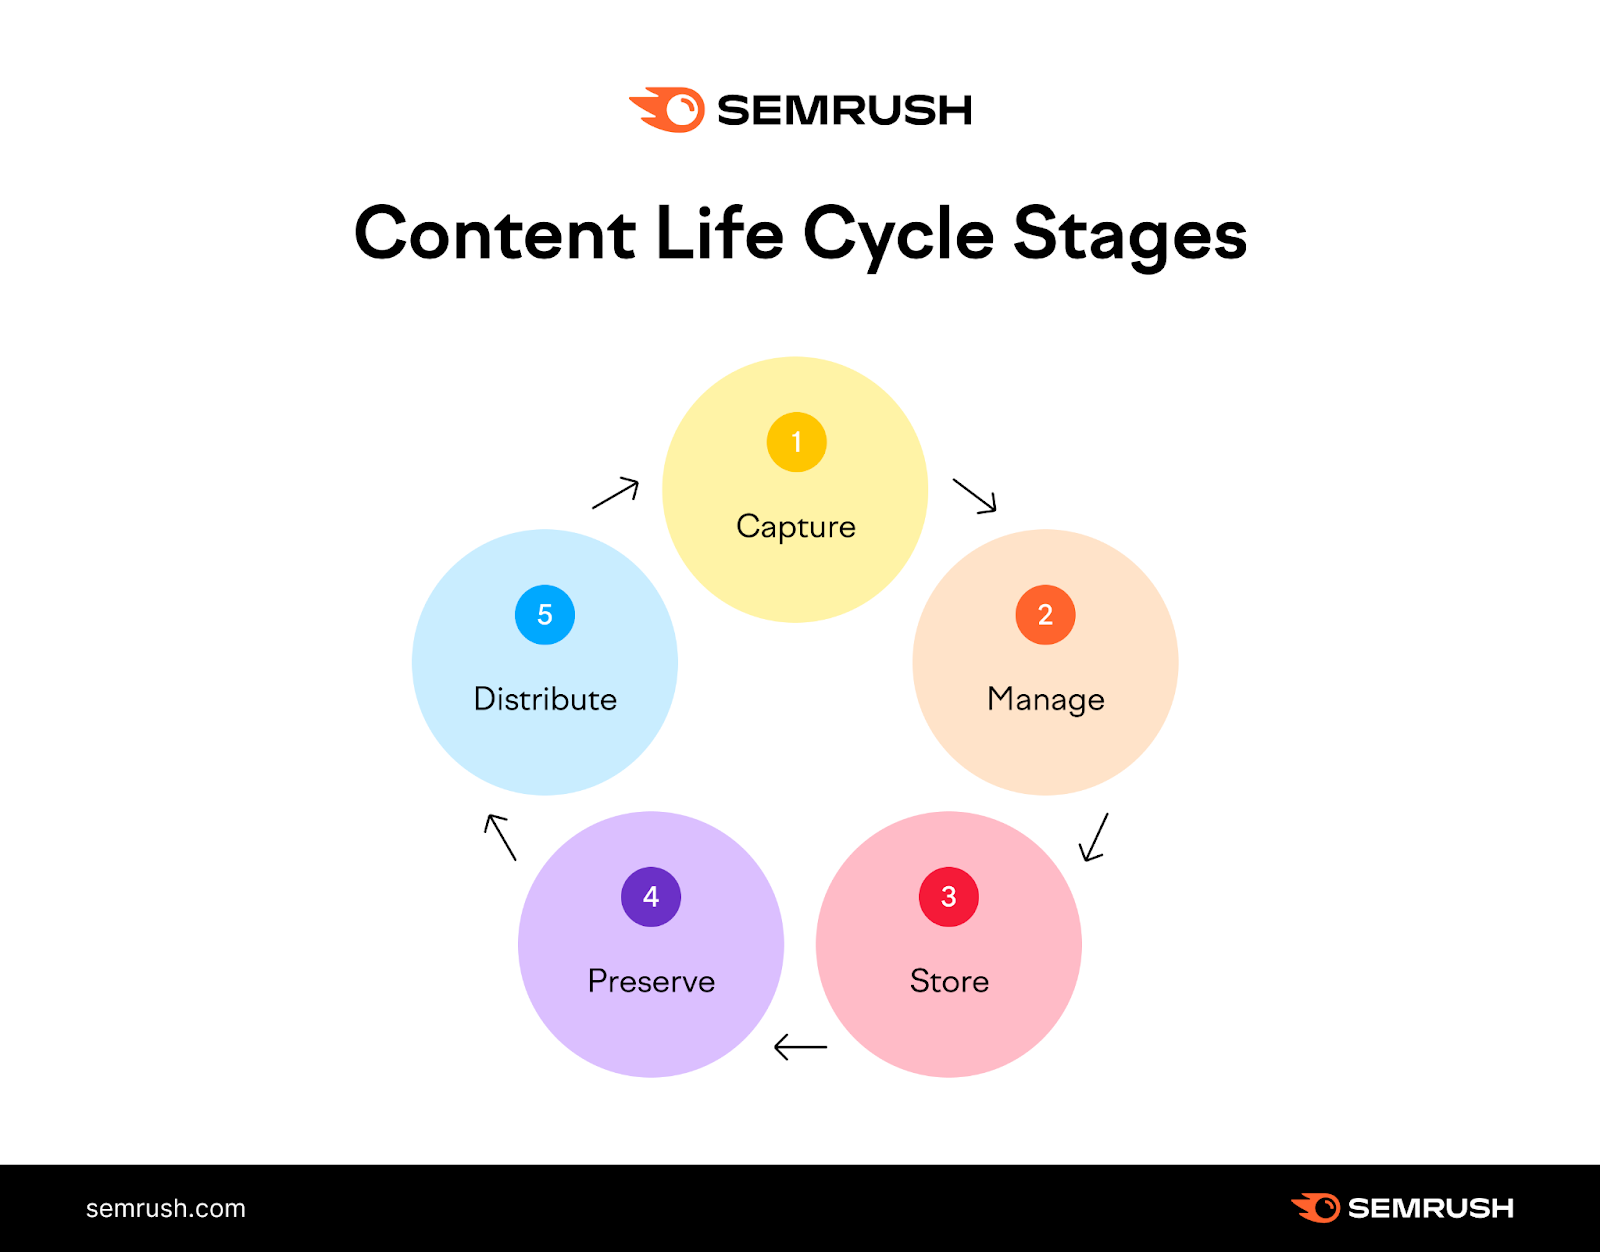 Content life cycle stages